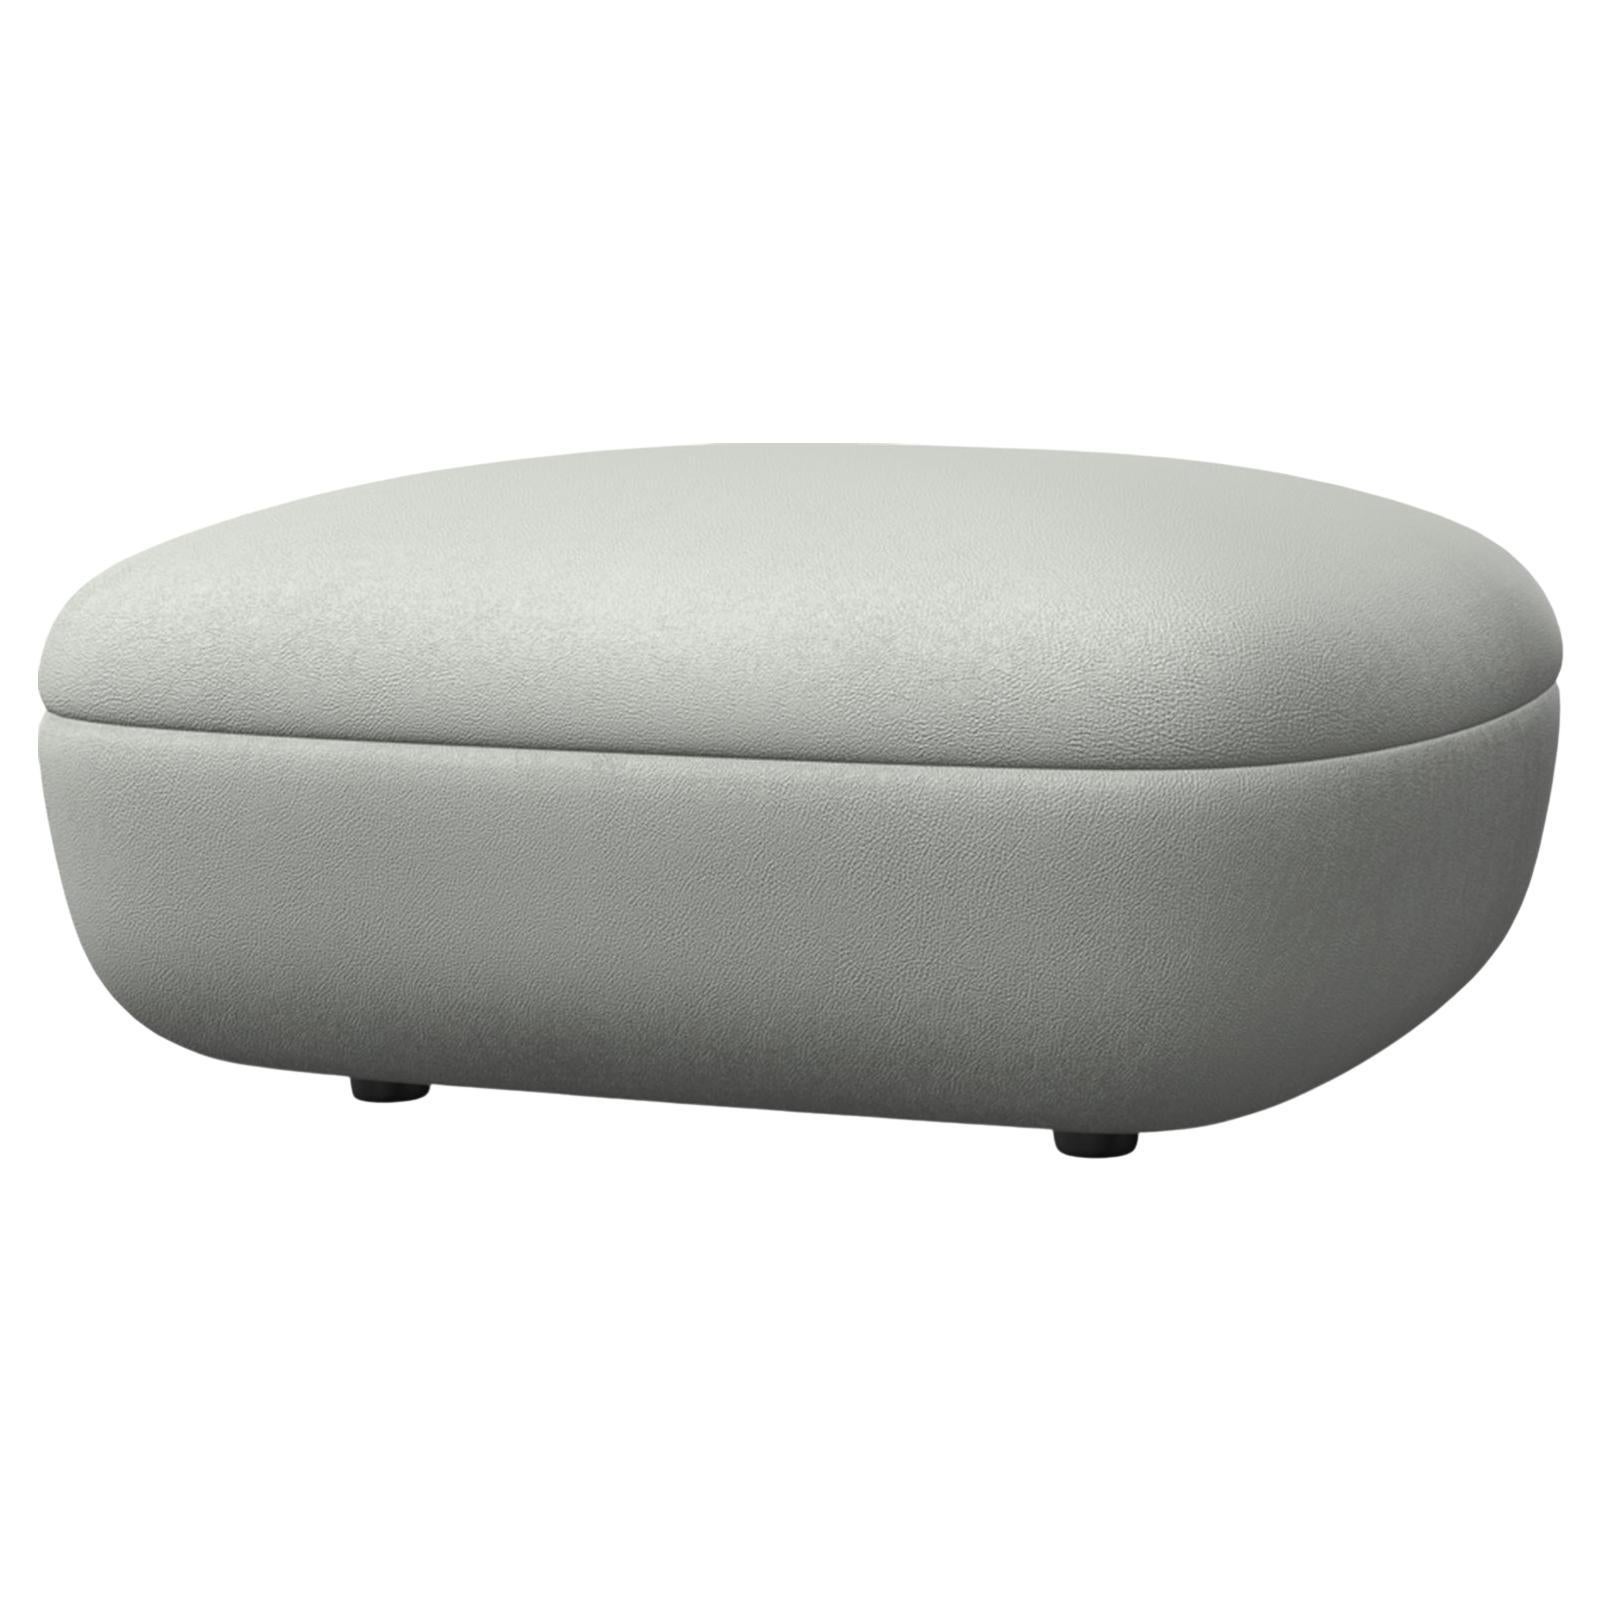 Moooi Bart Footstool in Ultra White 41594 Upholstery For Sale